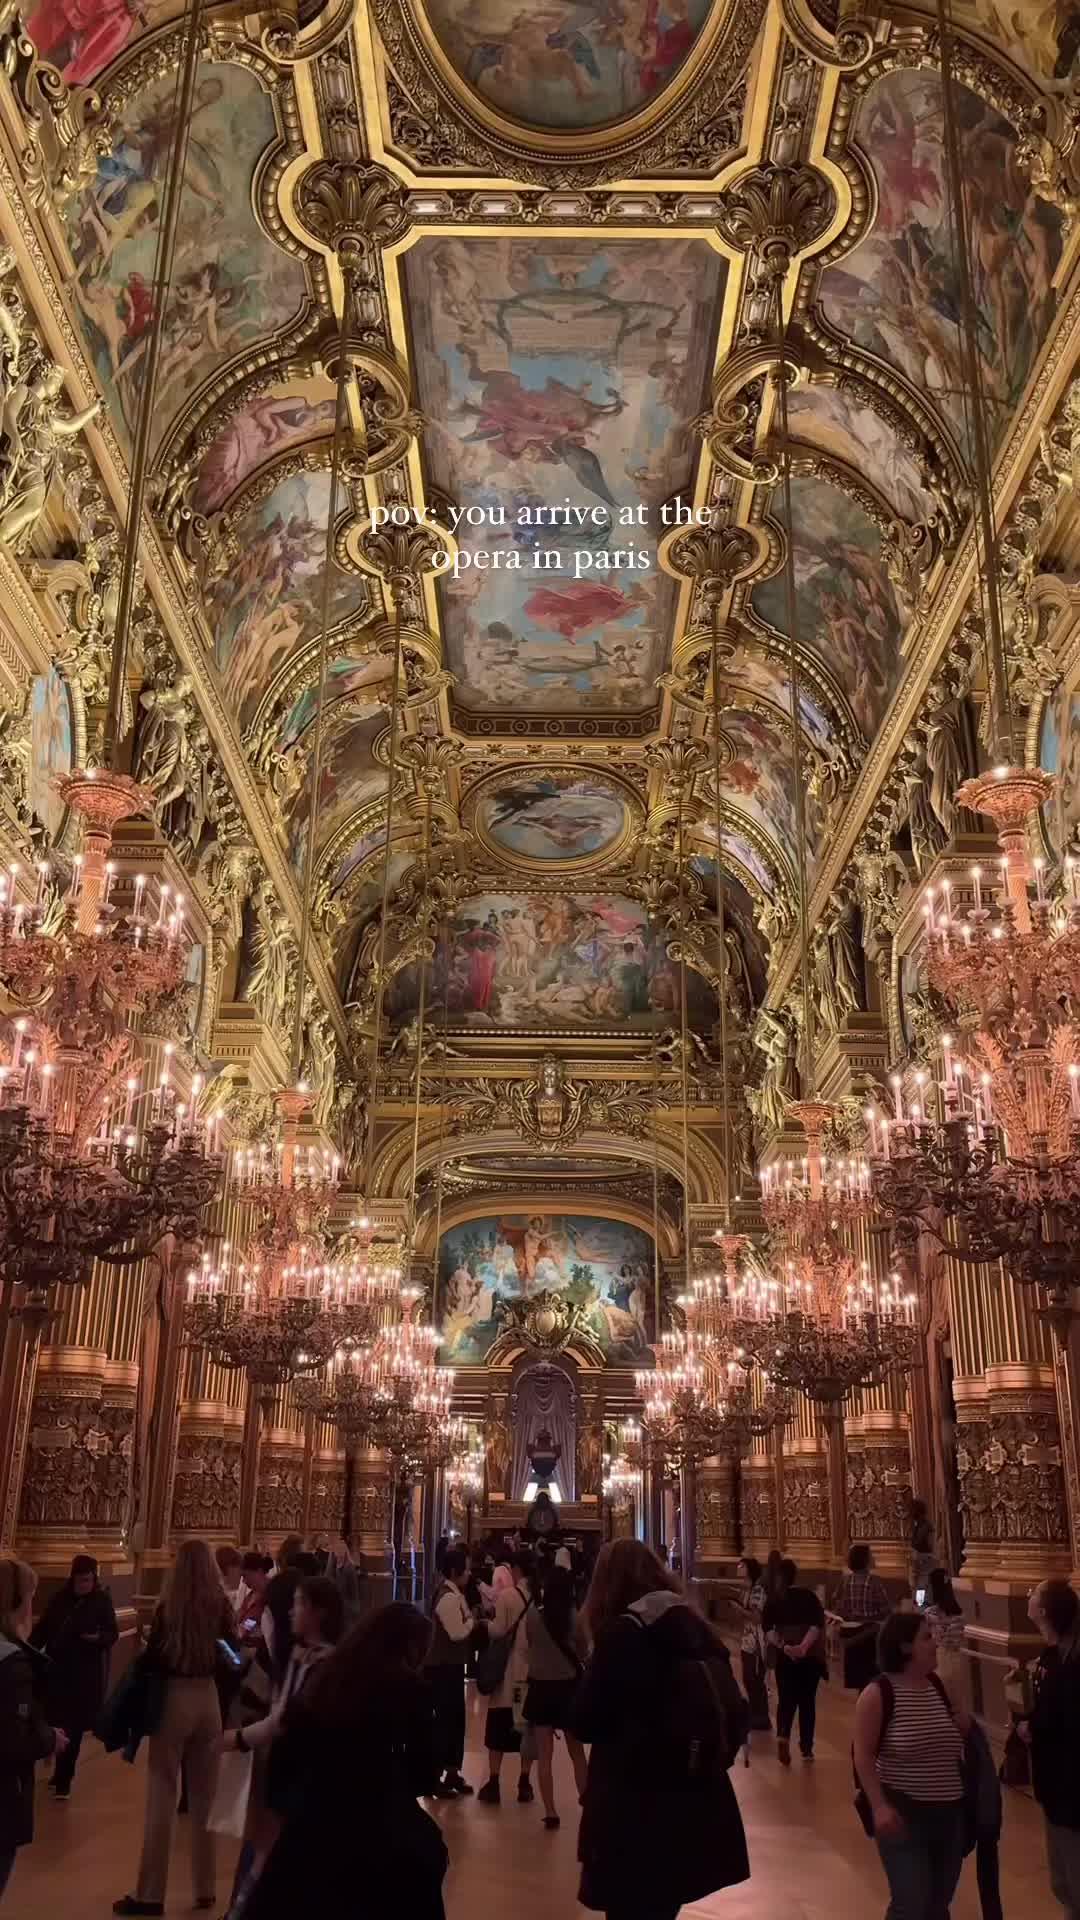 This may contain: people are walking around in an ornate building with chandeliers and paintings on the ceiling